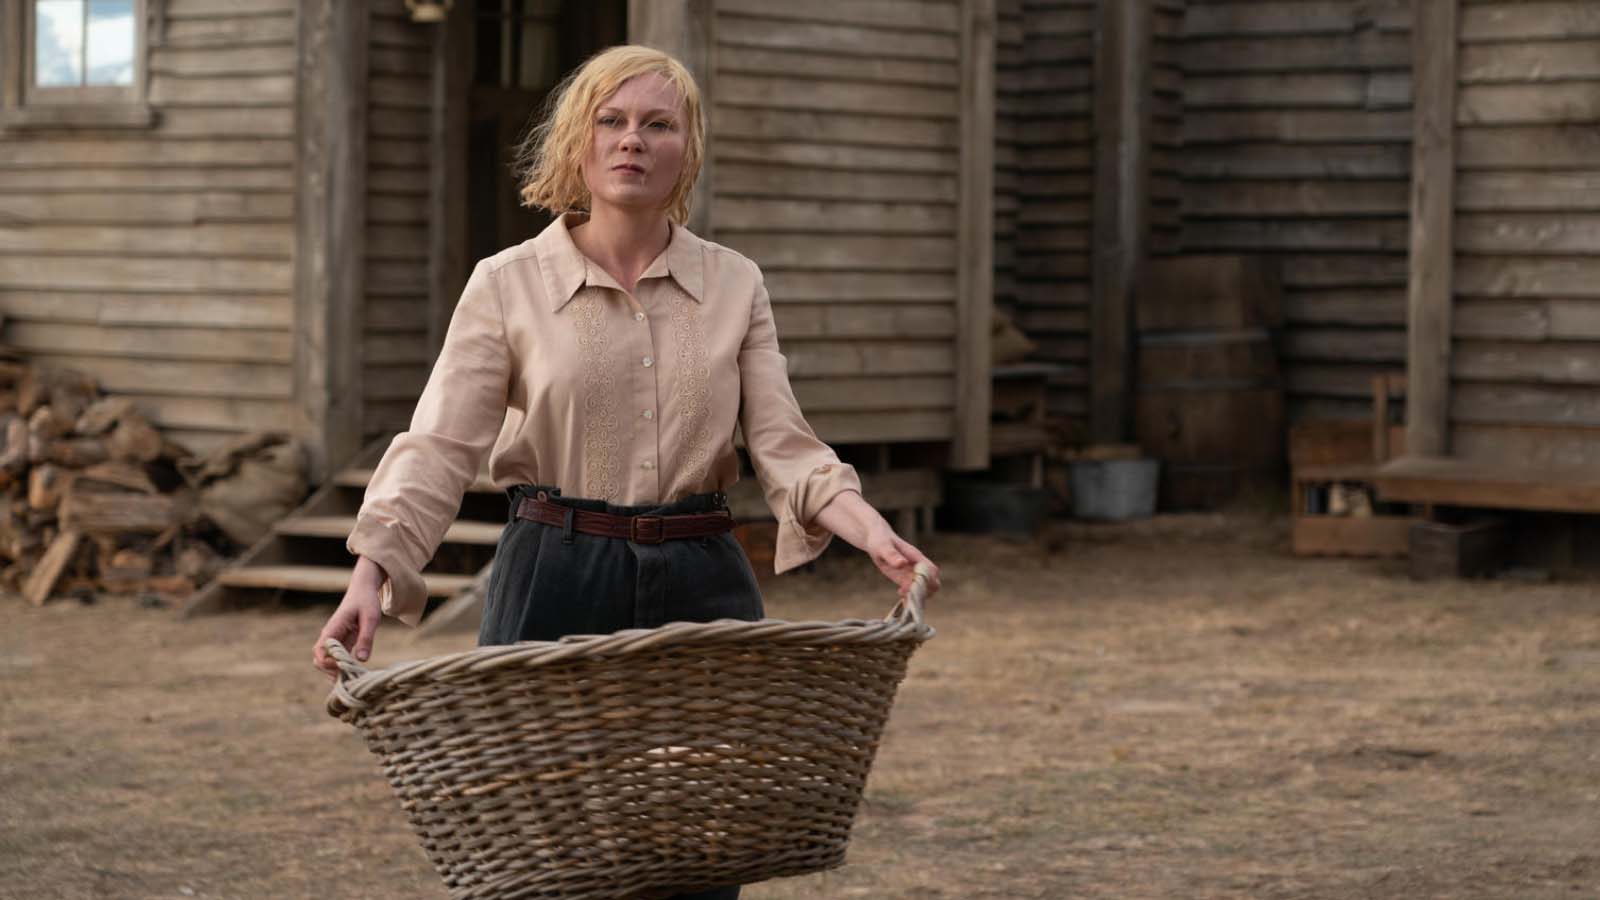 Kirsten Dunst as Rose Gordon in The Power of the Dog. Image © Netflix